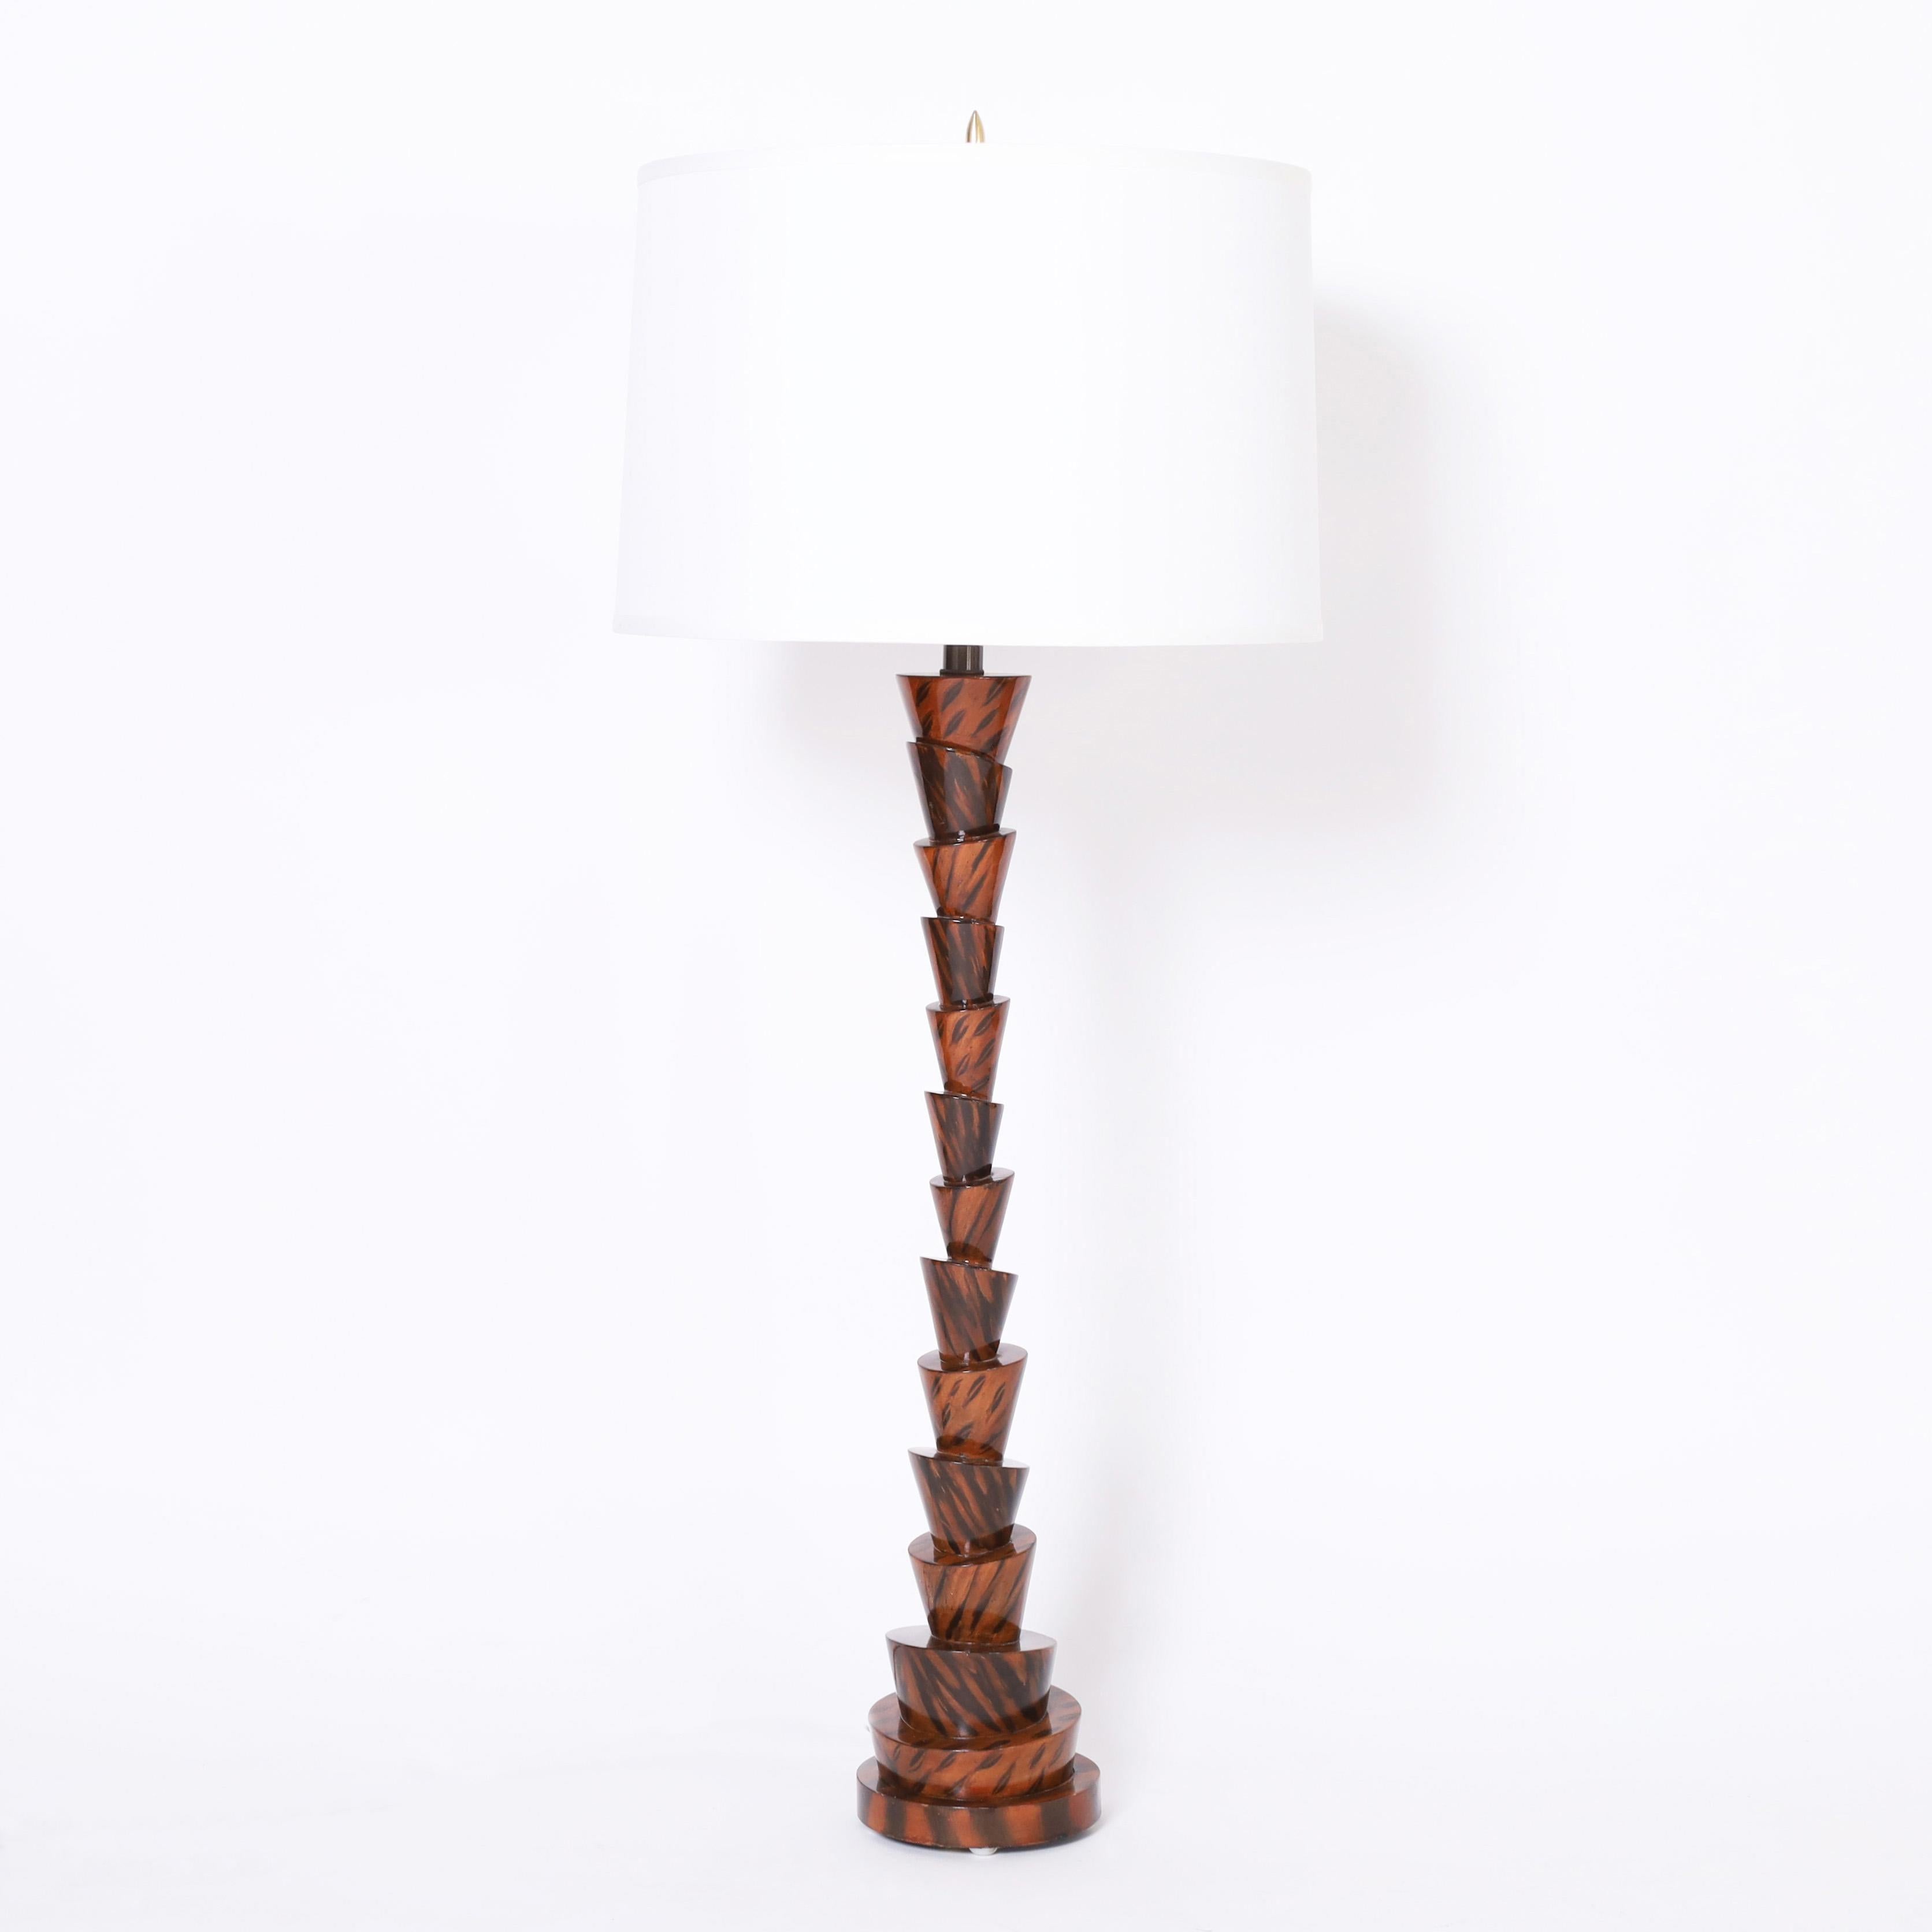 Unusual pair of table lamps crafted in composition in an eccentric form with a hand decorated faux wood finish.